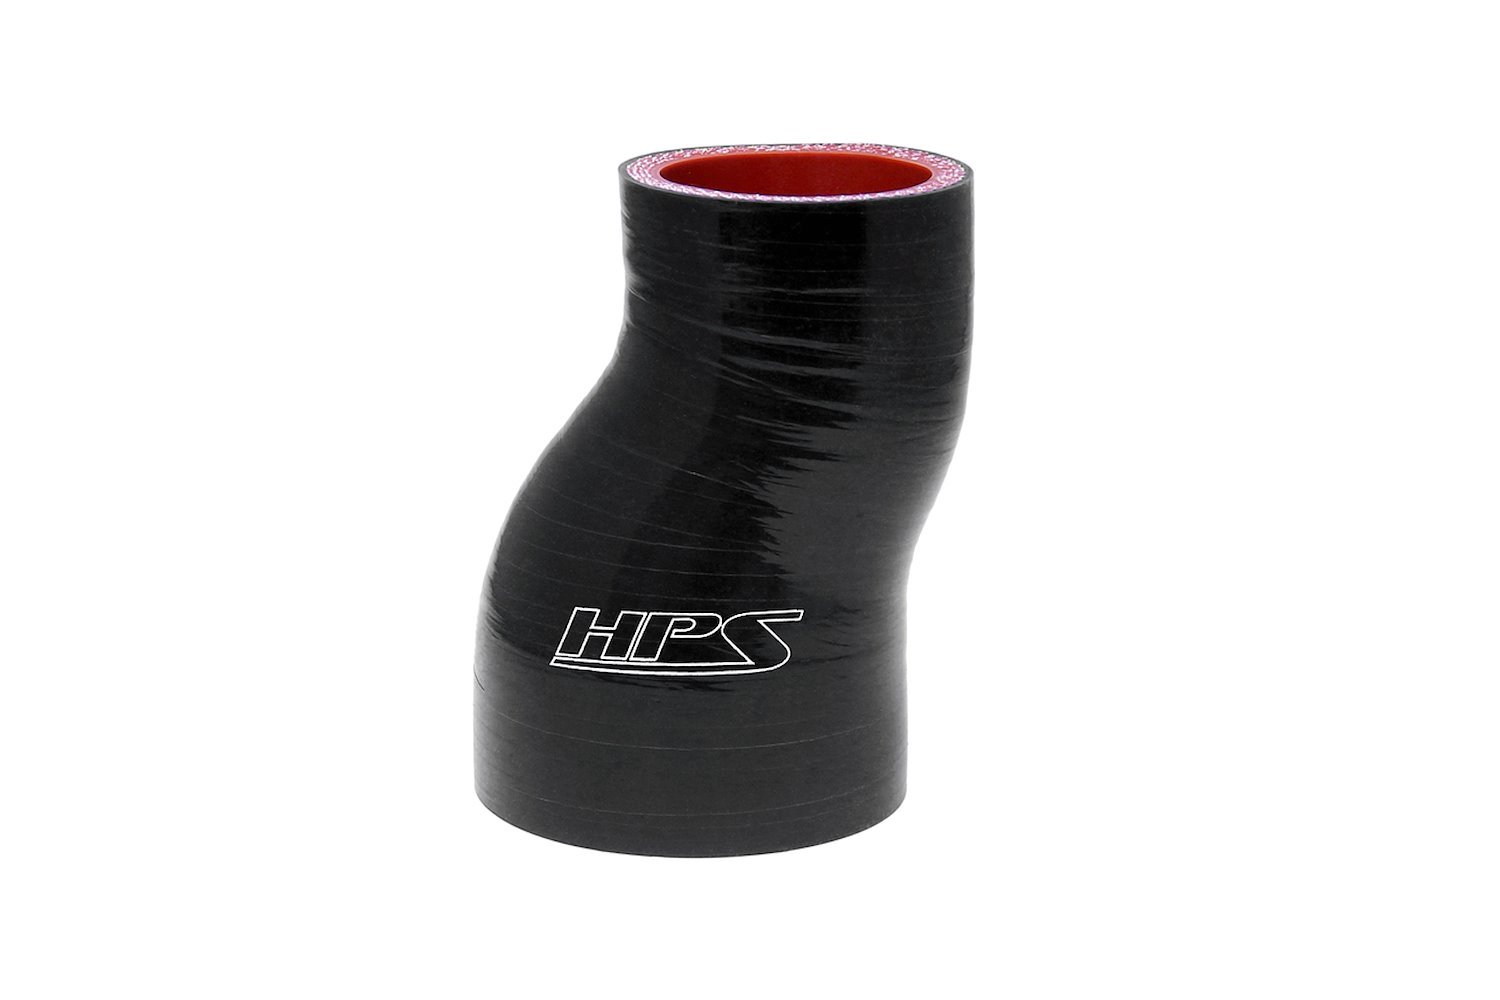 HTSOR-175-200-BLK Silicone Offset Reducer Hose, High-Temp Reinforced, 1-3/4 in. - 2 in. ID, 3 in. Long, Black